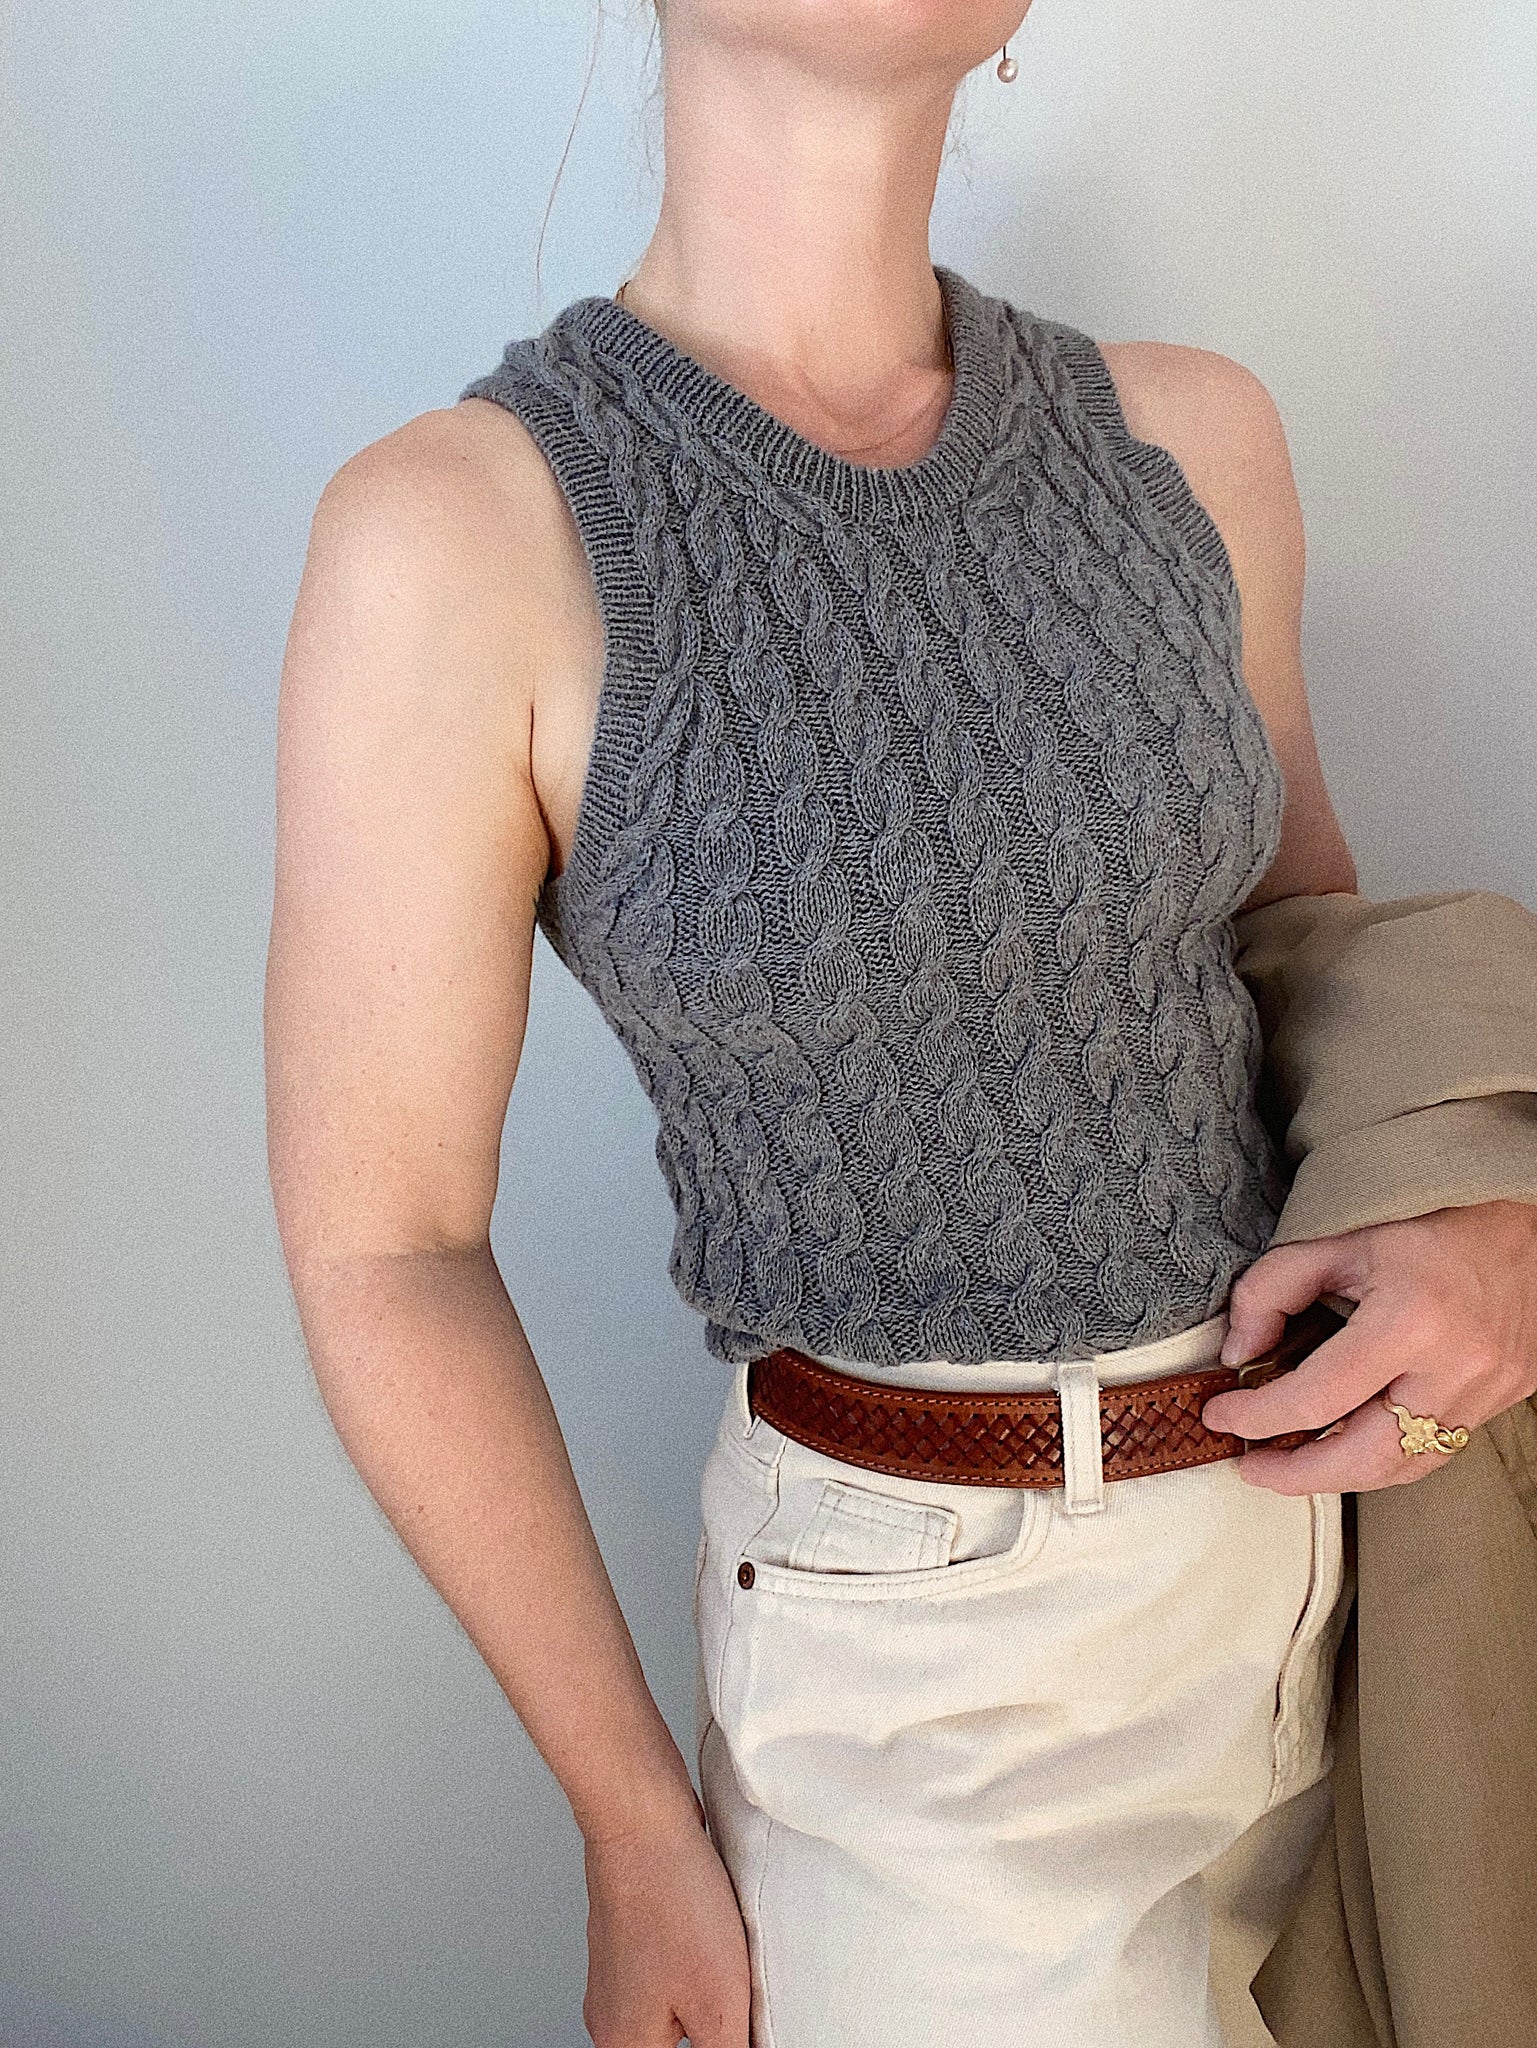 Camisole No. 8 - Knitting Pattern in English – • MY FAVOURITE